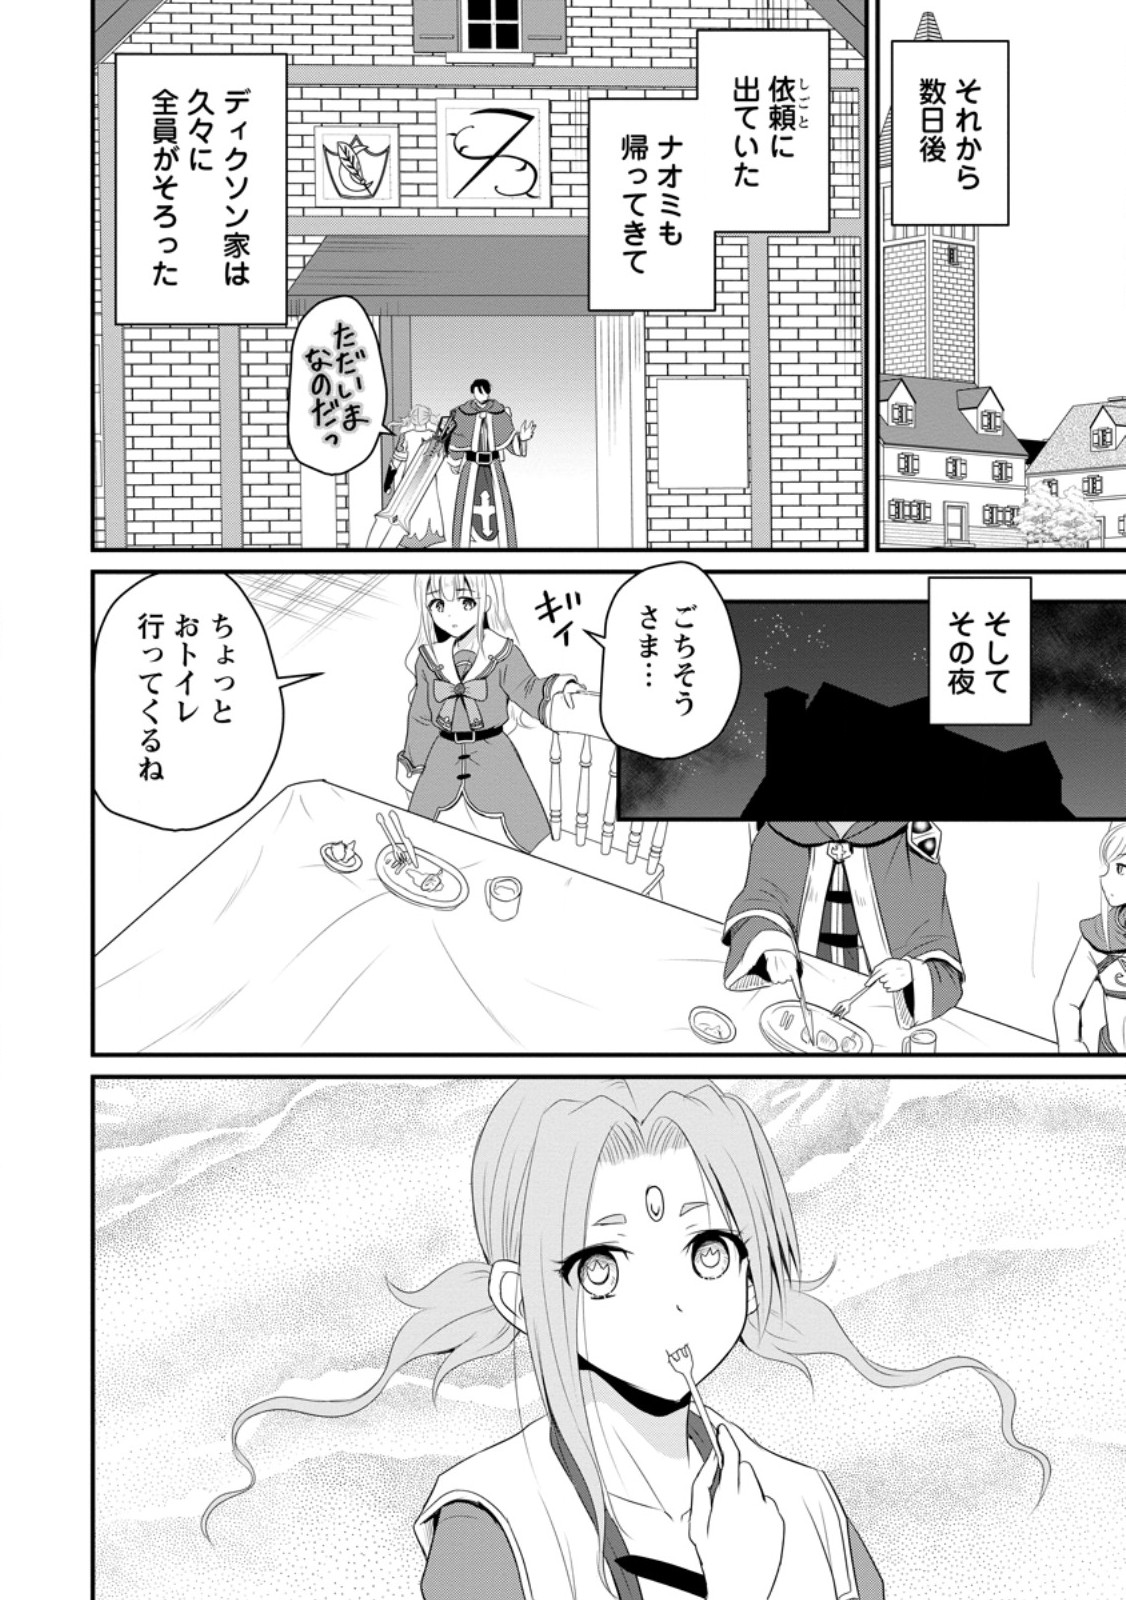 The Frontier Life of The Low-Class Ossan Healer And The Lovery Girl - Chapter 49.2 - Page 10